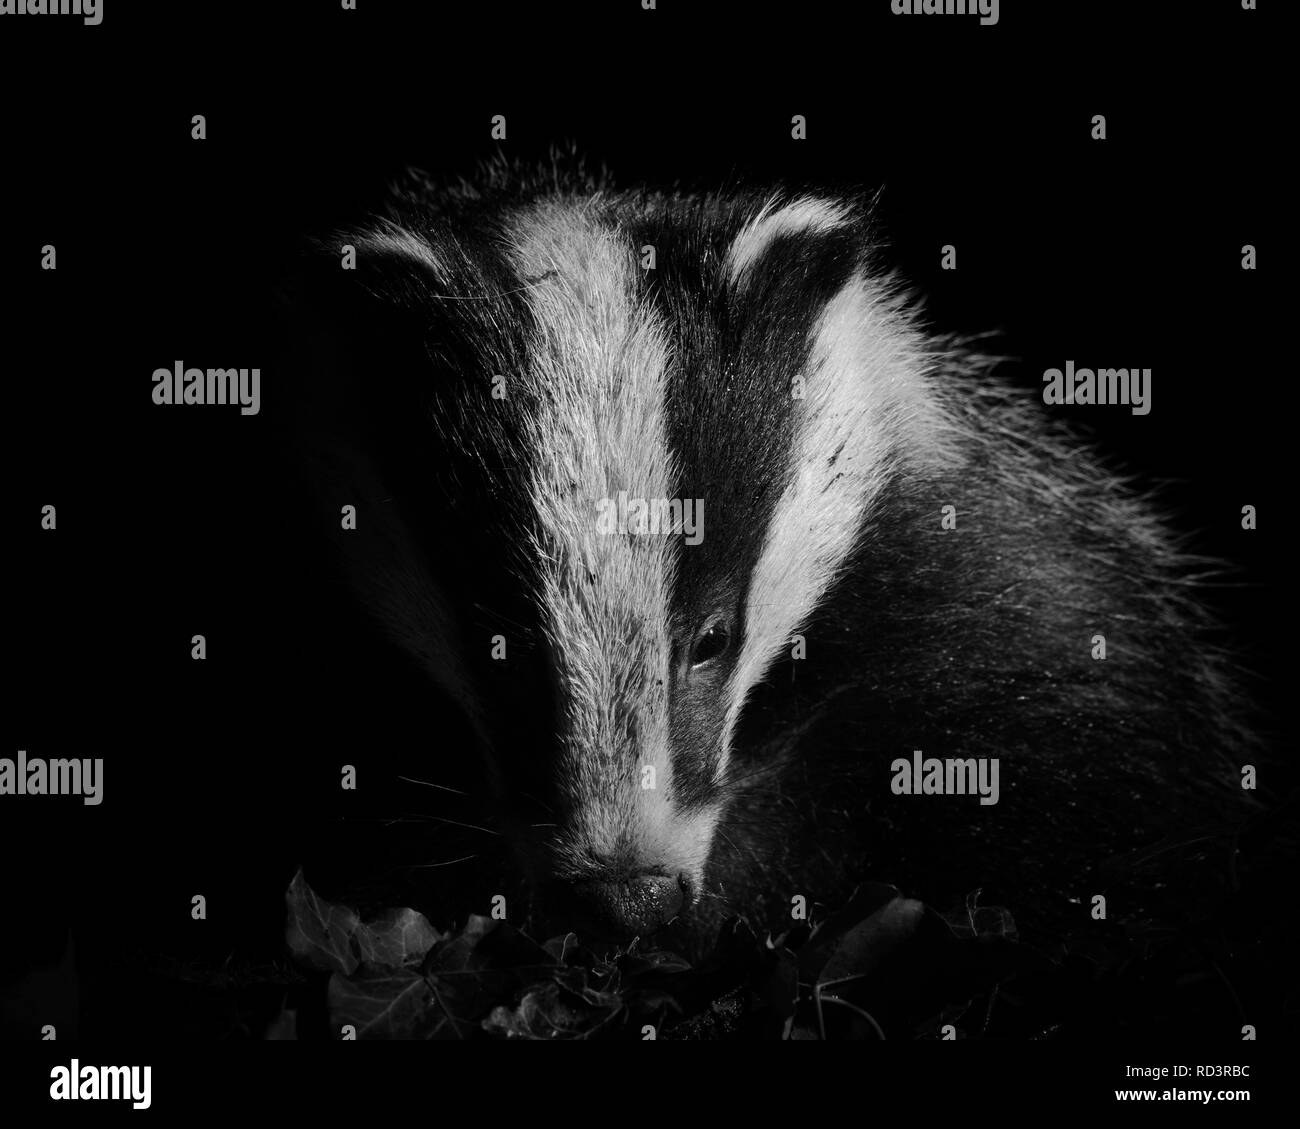 An Iconic Wild Badger in Sheffield, U.K. Badgers have been heavily persecuted in recent times but are amazing to see, very shy and elusive. Stock Photo